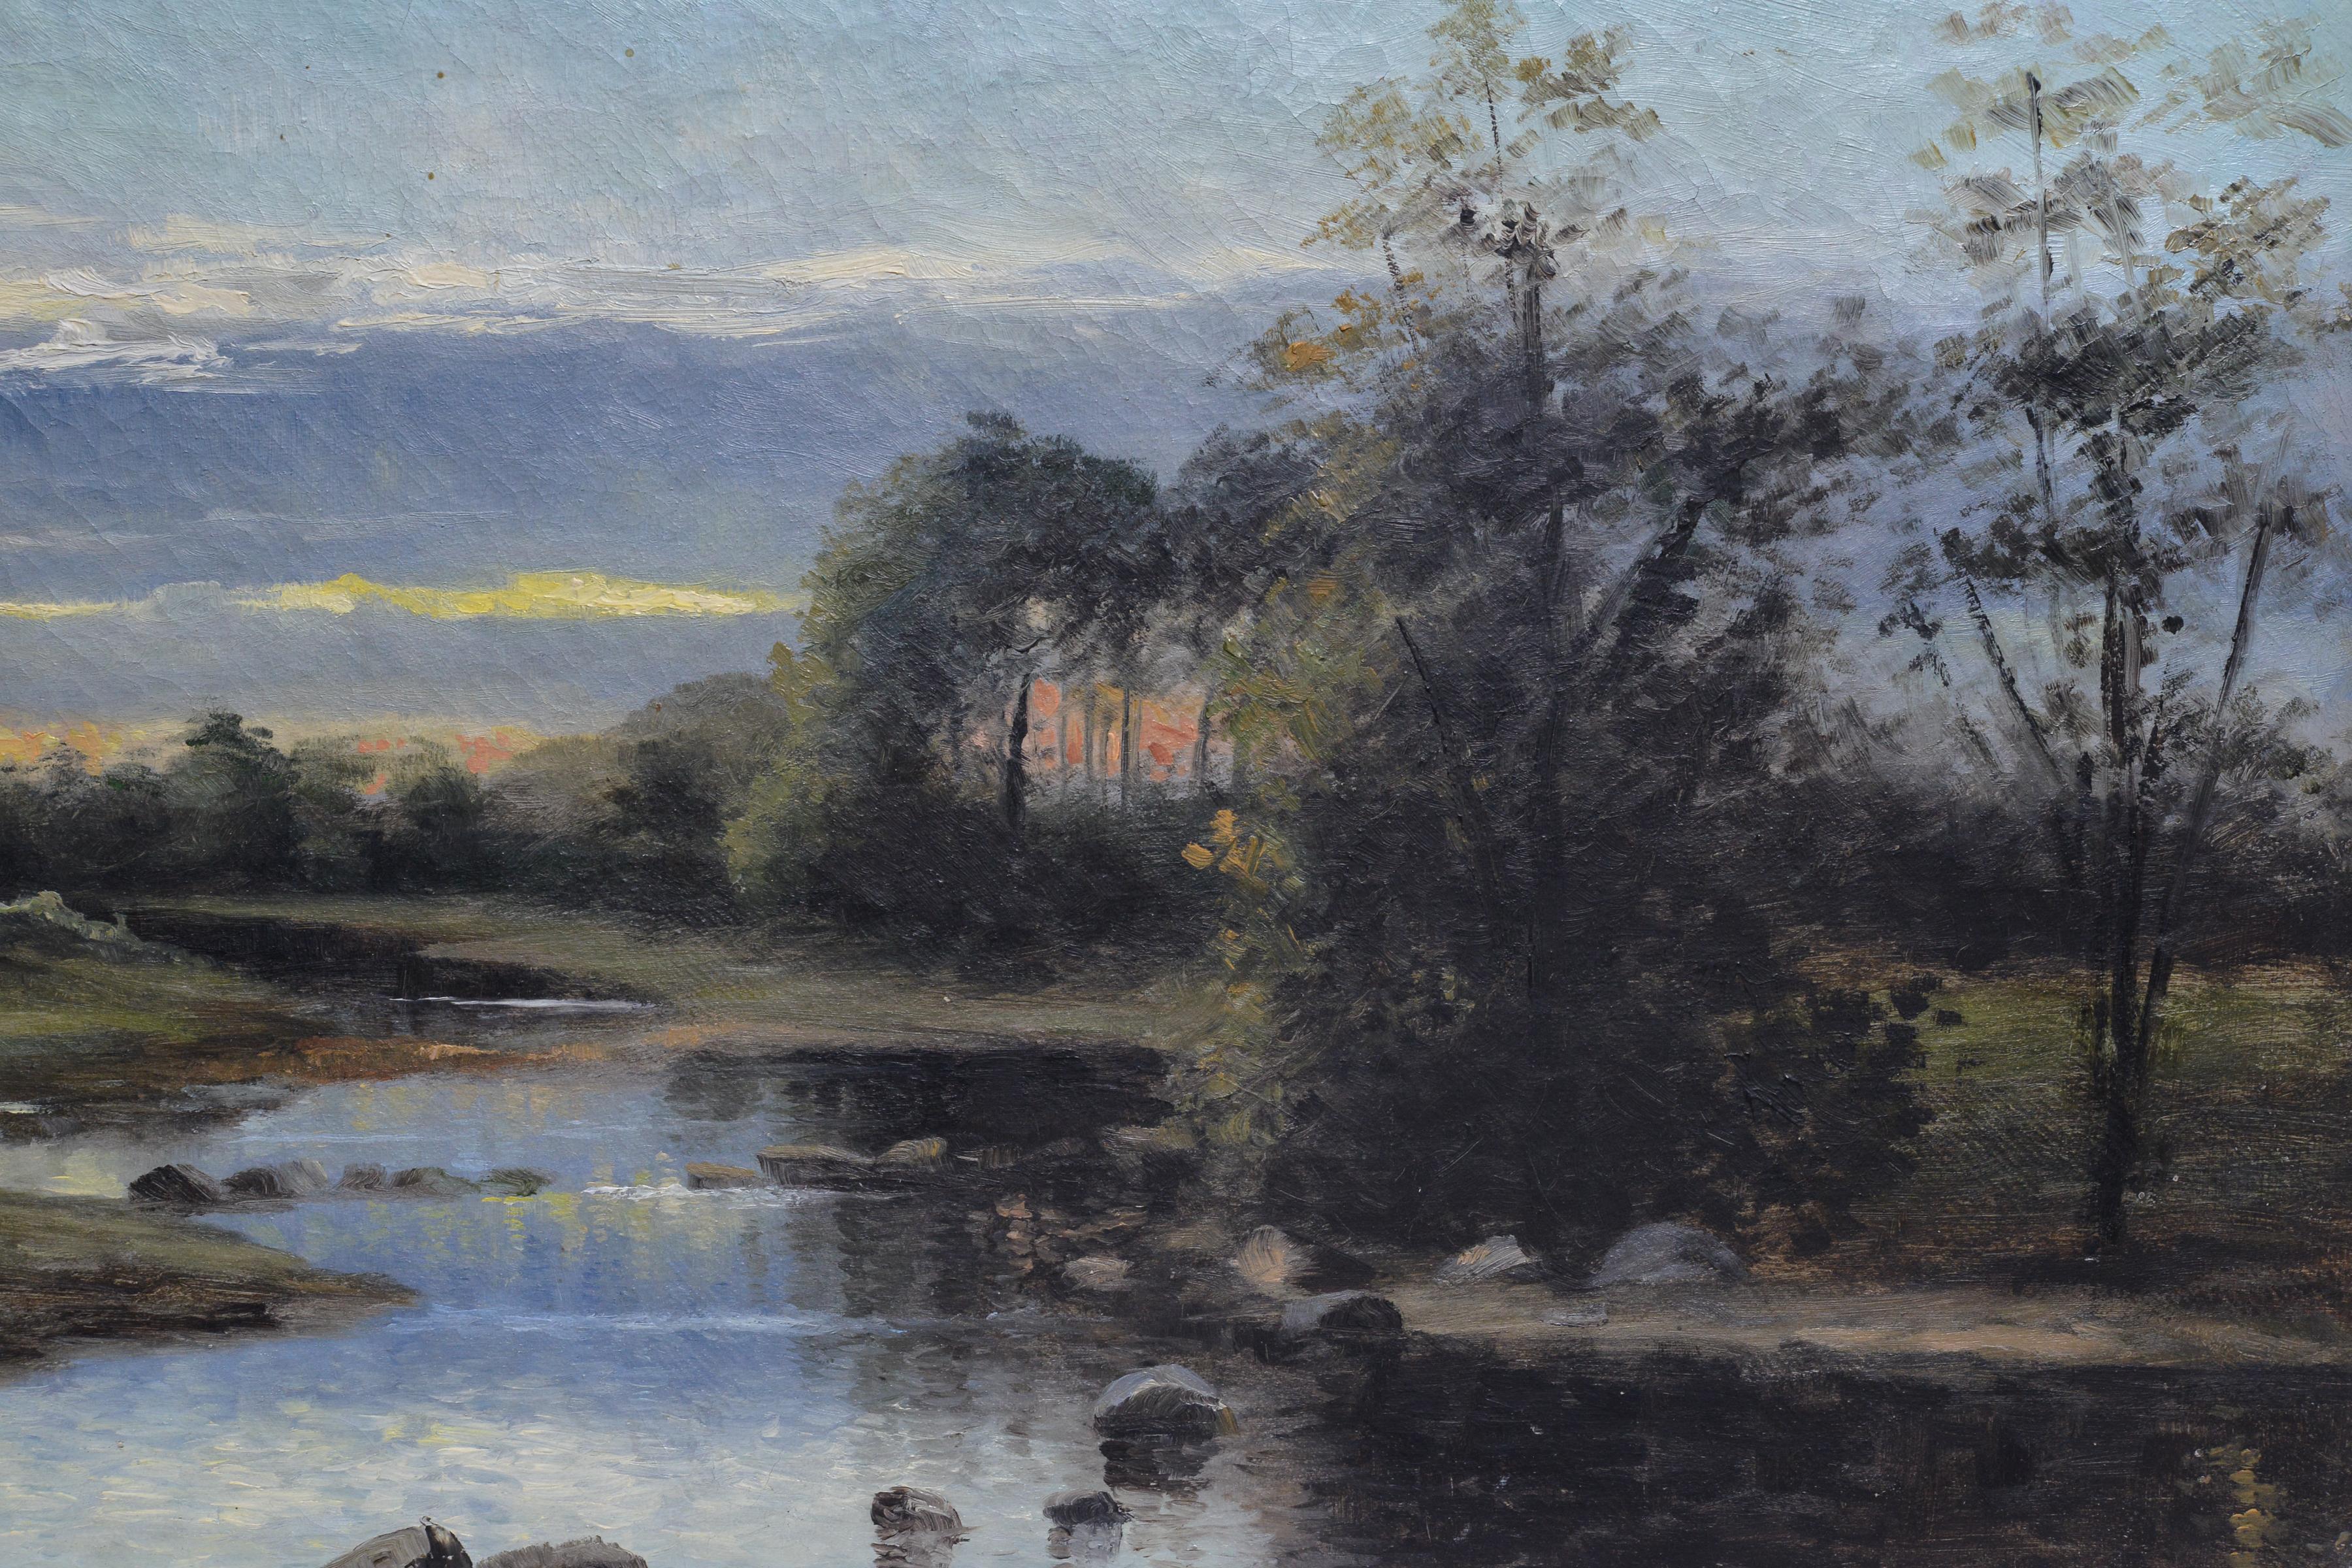 Evening twilight on the river - is a painting in which the light of a beautiful sunset merges with the mysterious waters of the river. This artwork immerses us in the atmosphere of a quiet and calm evening, when the sun is already setting behind the